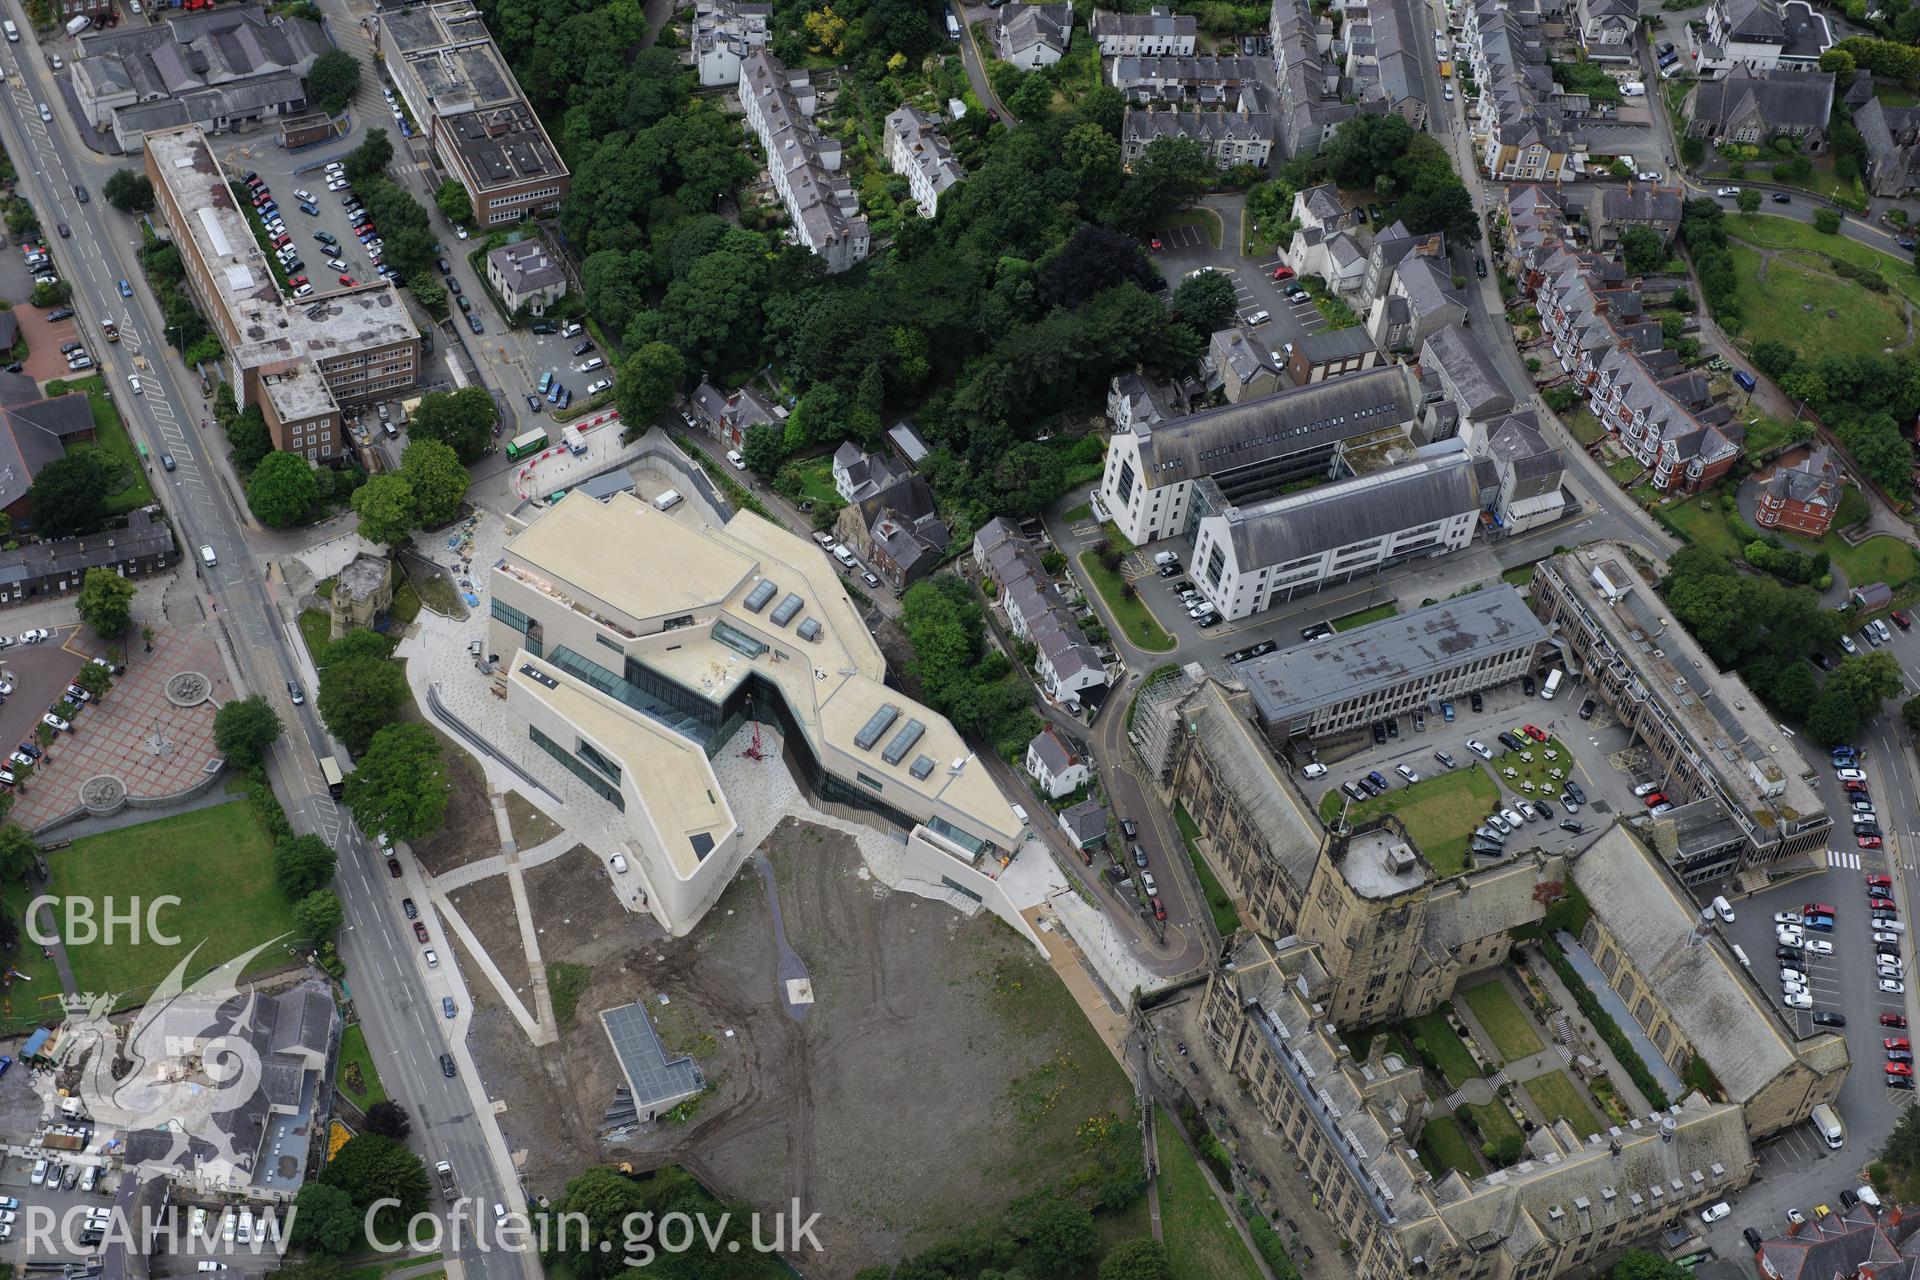 Bangor University, Theatr Gwynedd (demolished), Pontio, War Memorial, Baptist Church & Presbyterian Church. Oblique aerial photograph taken during the Royal Commission's programme of archaeological aerial reconnaissance by Toby Driver on 30th July 2015.